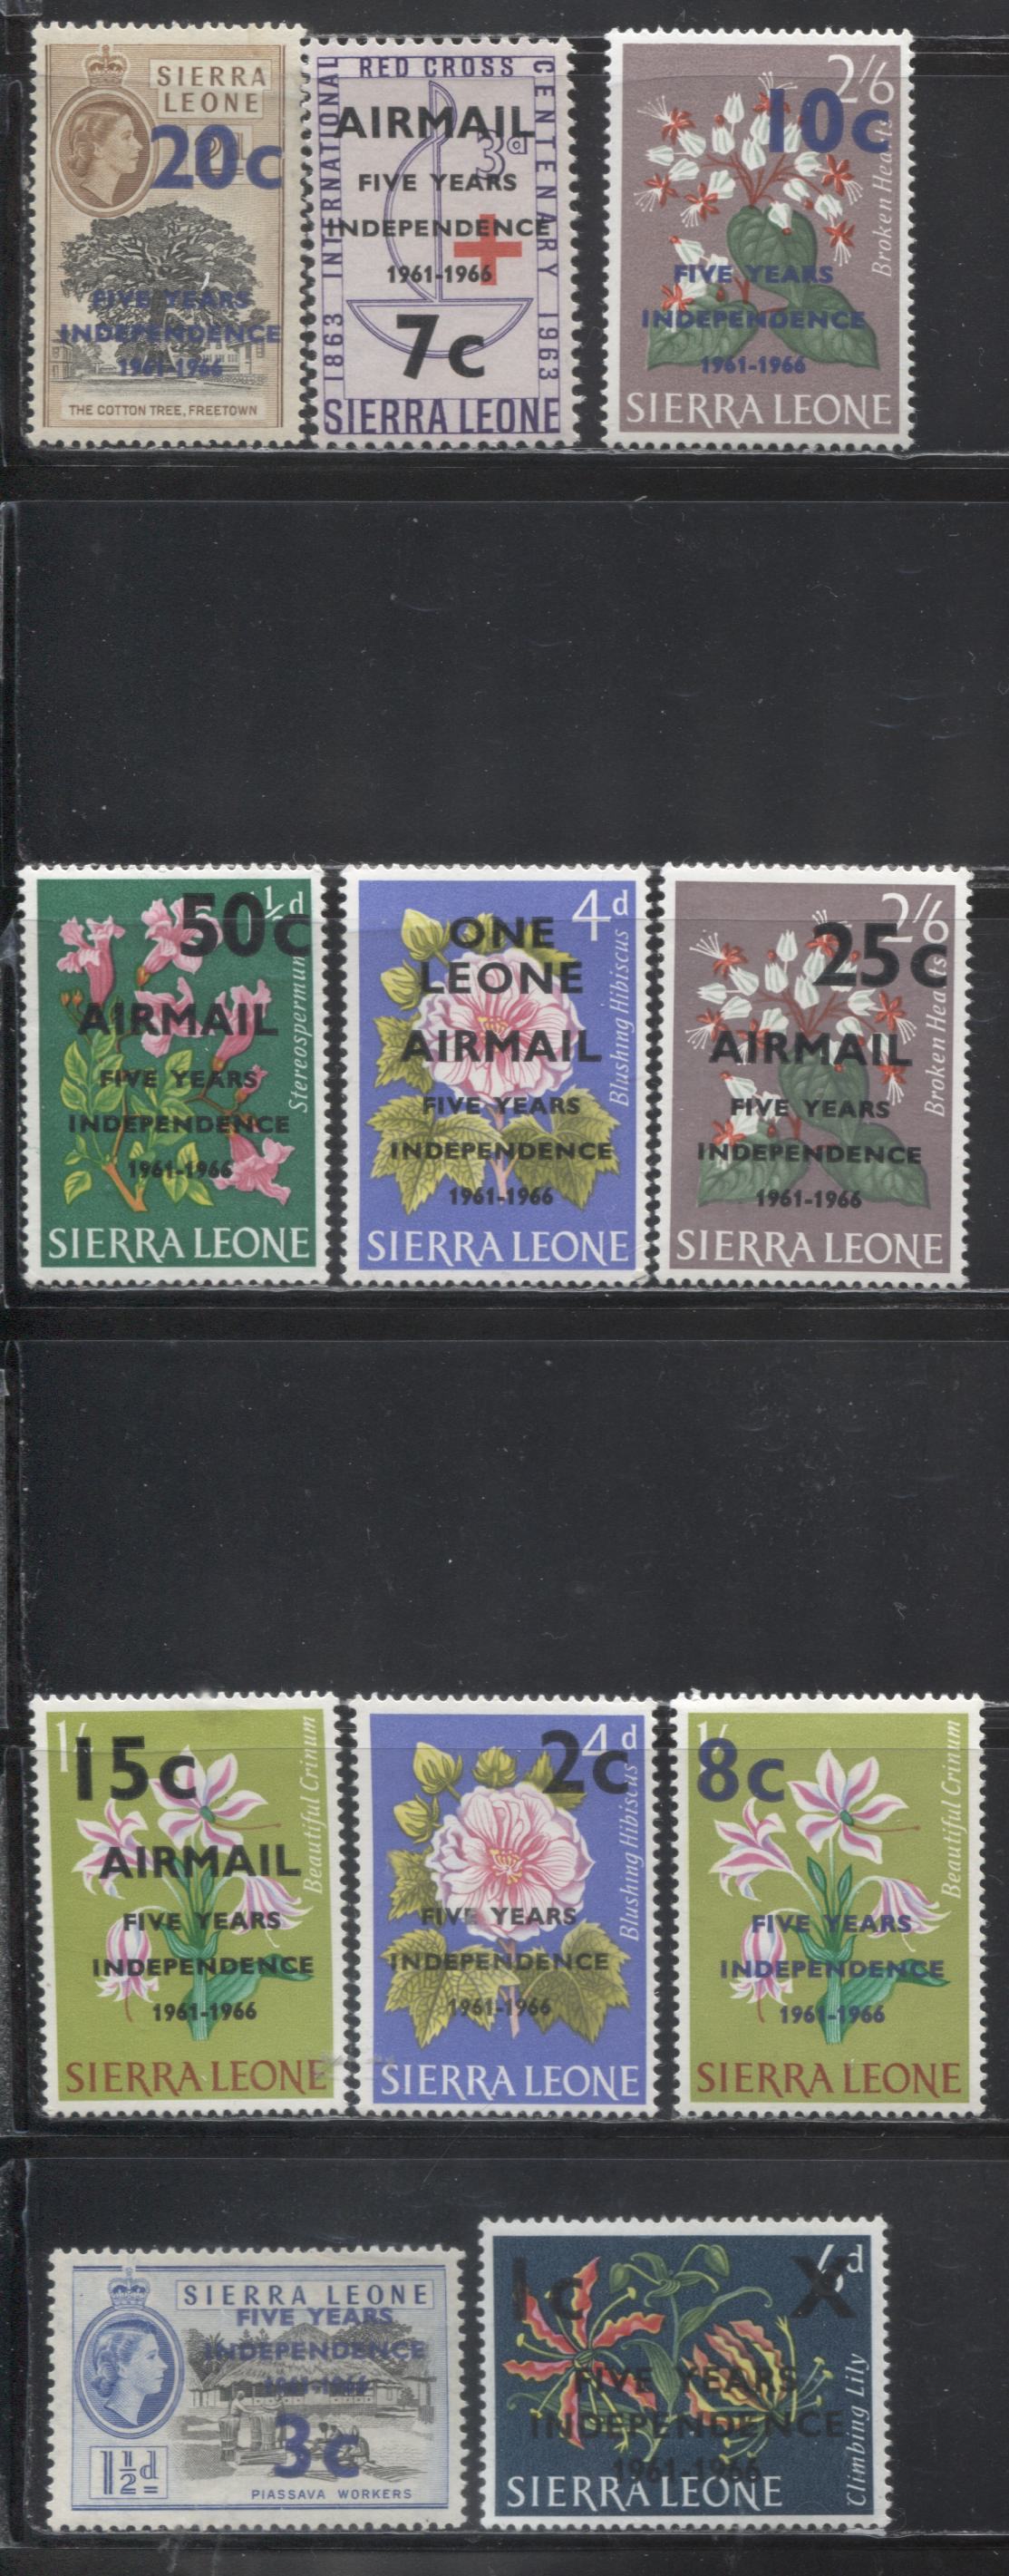 Lot 296 Sierra Leone SG#387-397 1c - 1L, 1966 5 Year Independence Overprints on Harrison Floral Definitive Issue and 1956-61 Waterlow Definitives and 1963 Red Cross Issue, a Mostly VFNH Set